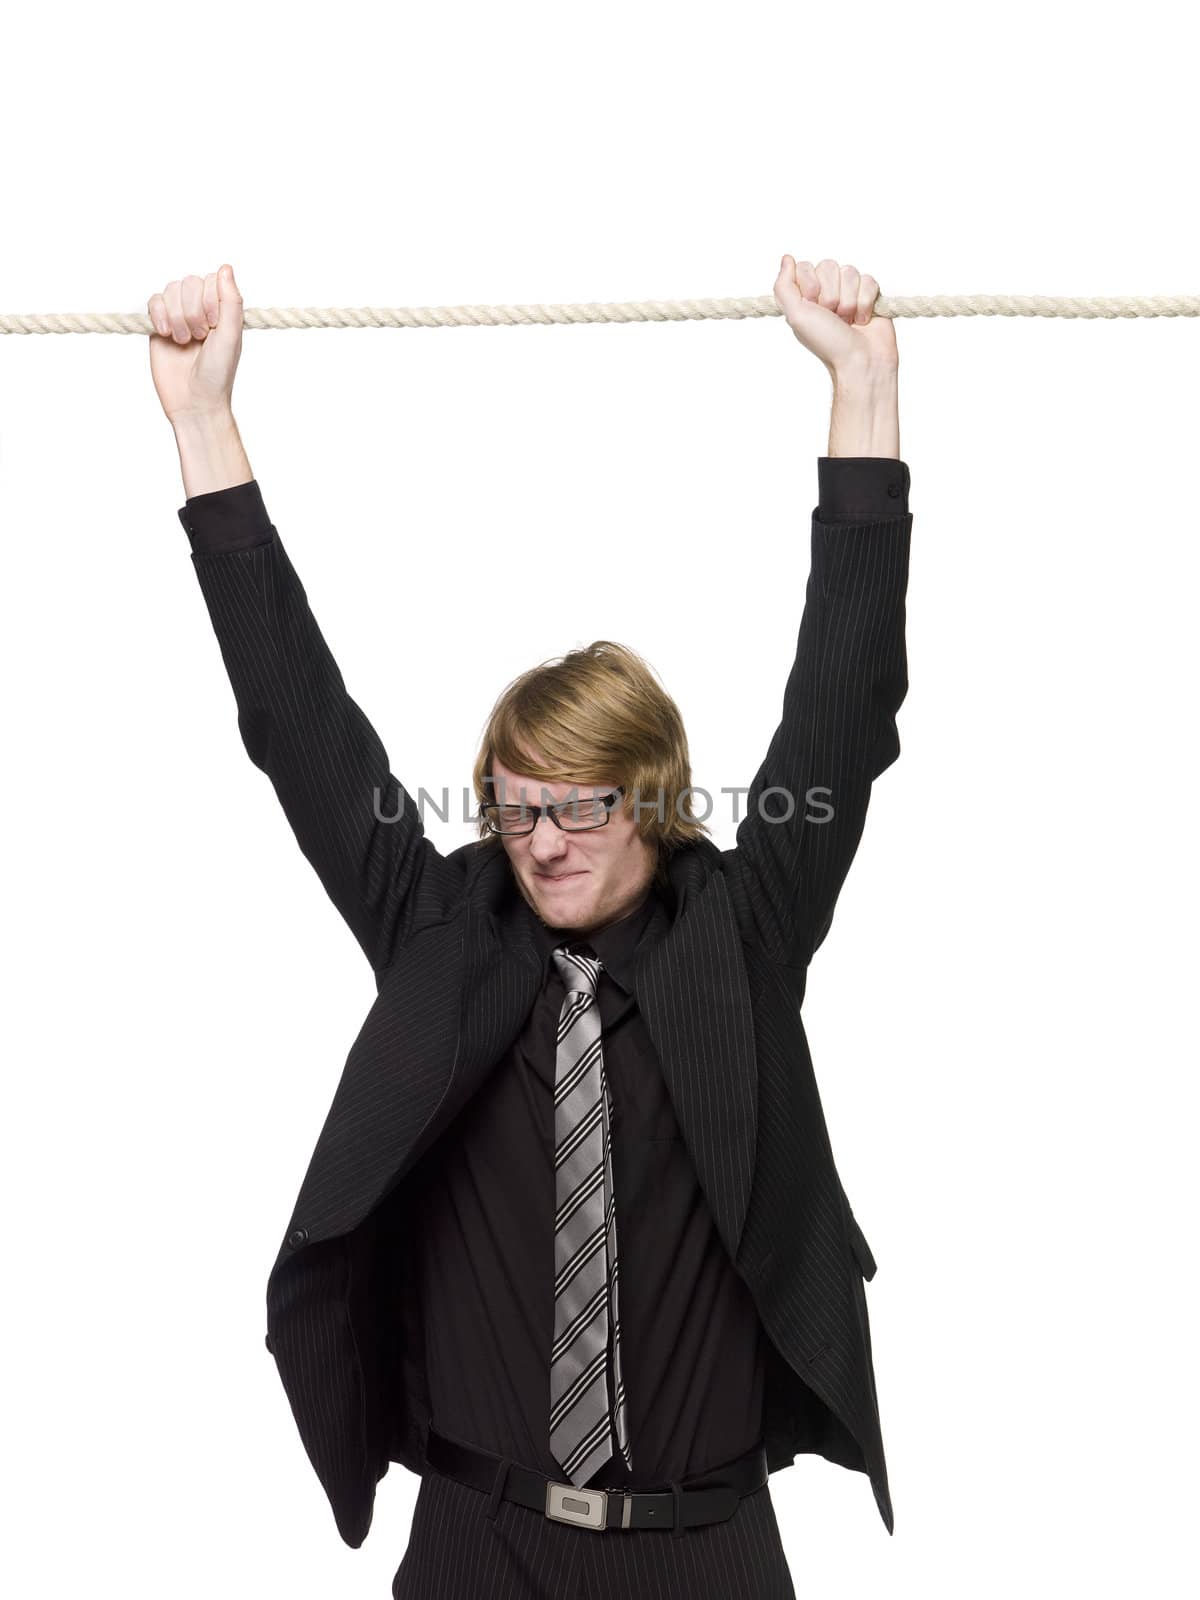 Man hanging in a rope